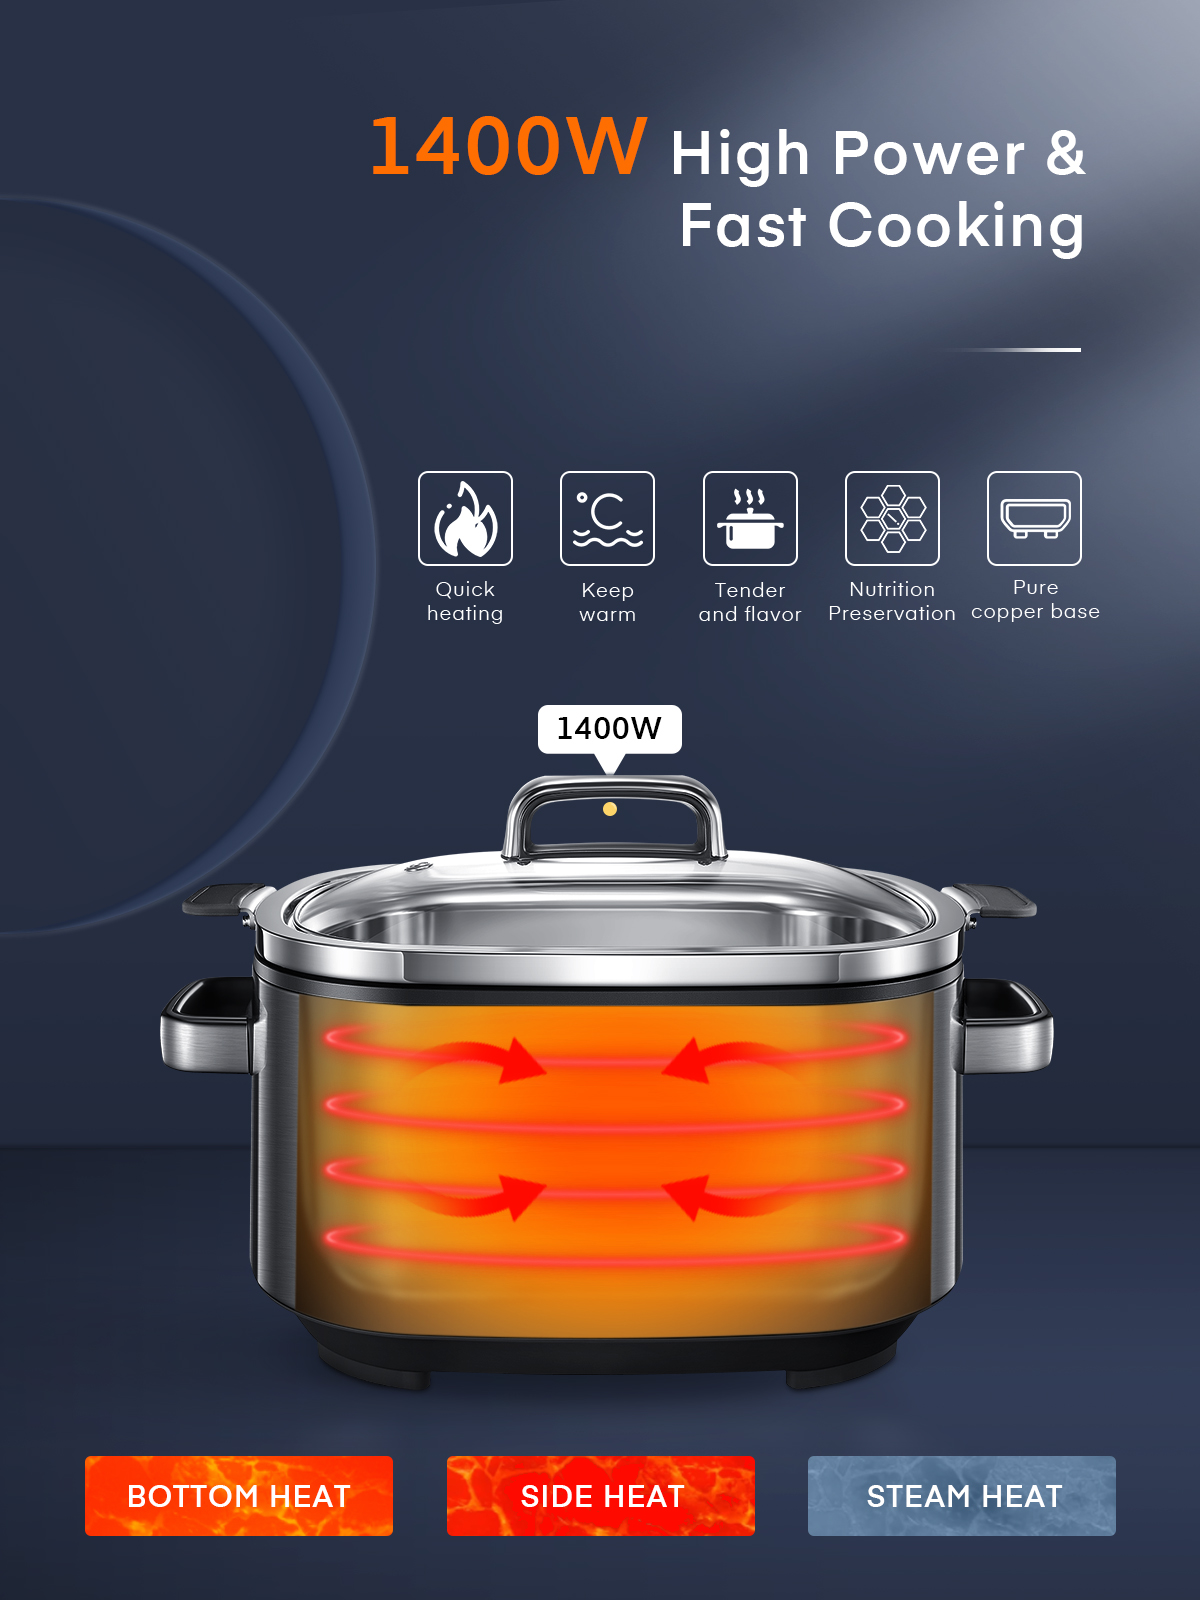 Slow Cooker, HOUSNAT 10 in 1 Programmable Cooker, 6Qt Stainless Steel, Rice Cooker, Yogurt Maker, Delay Start, Steaming Rack and Glass Lid, Adjustable Temp&Time for Slow Cook with Digital Timer - image 2 of 6